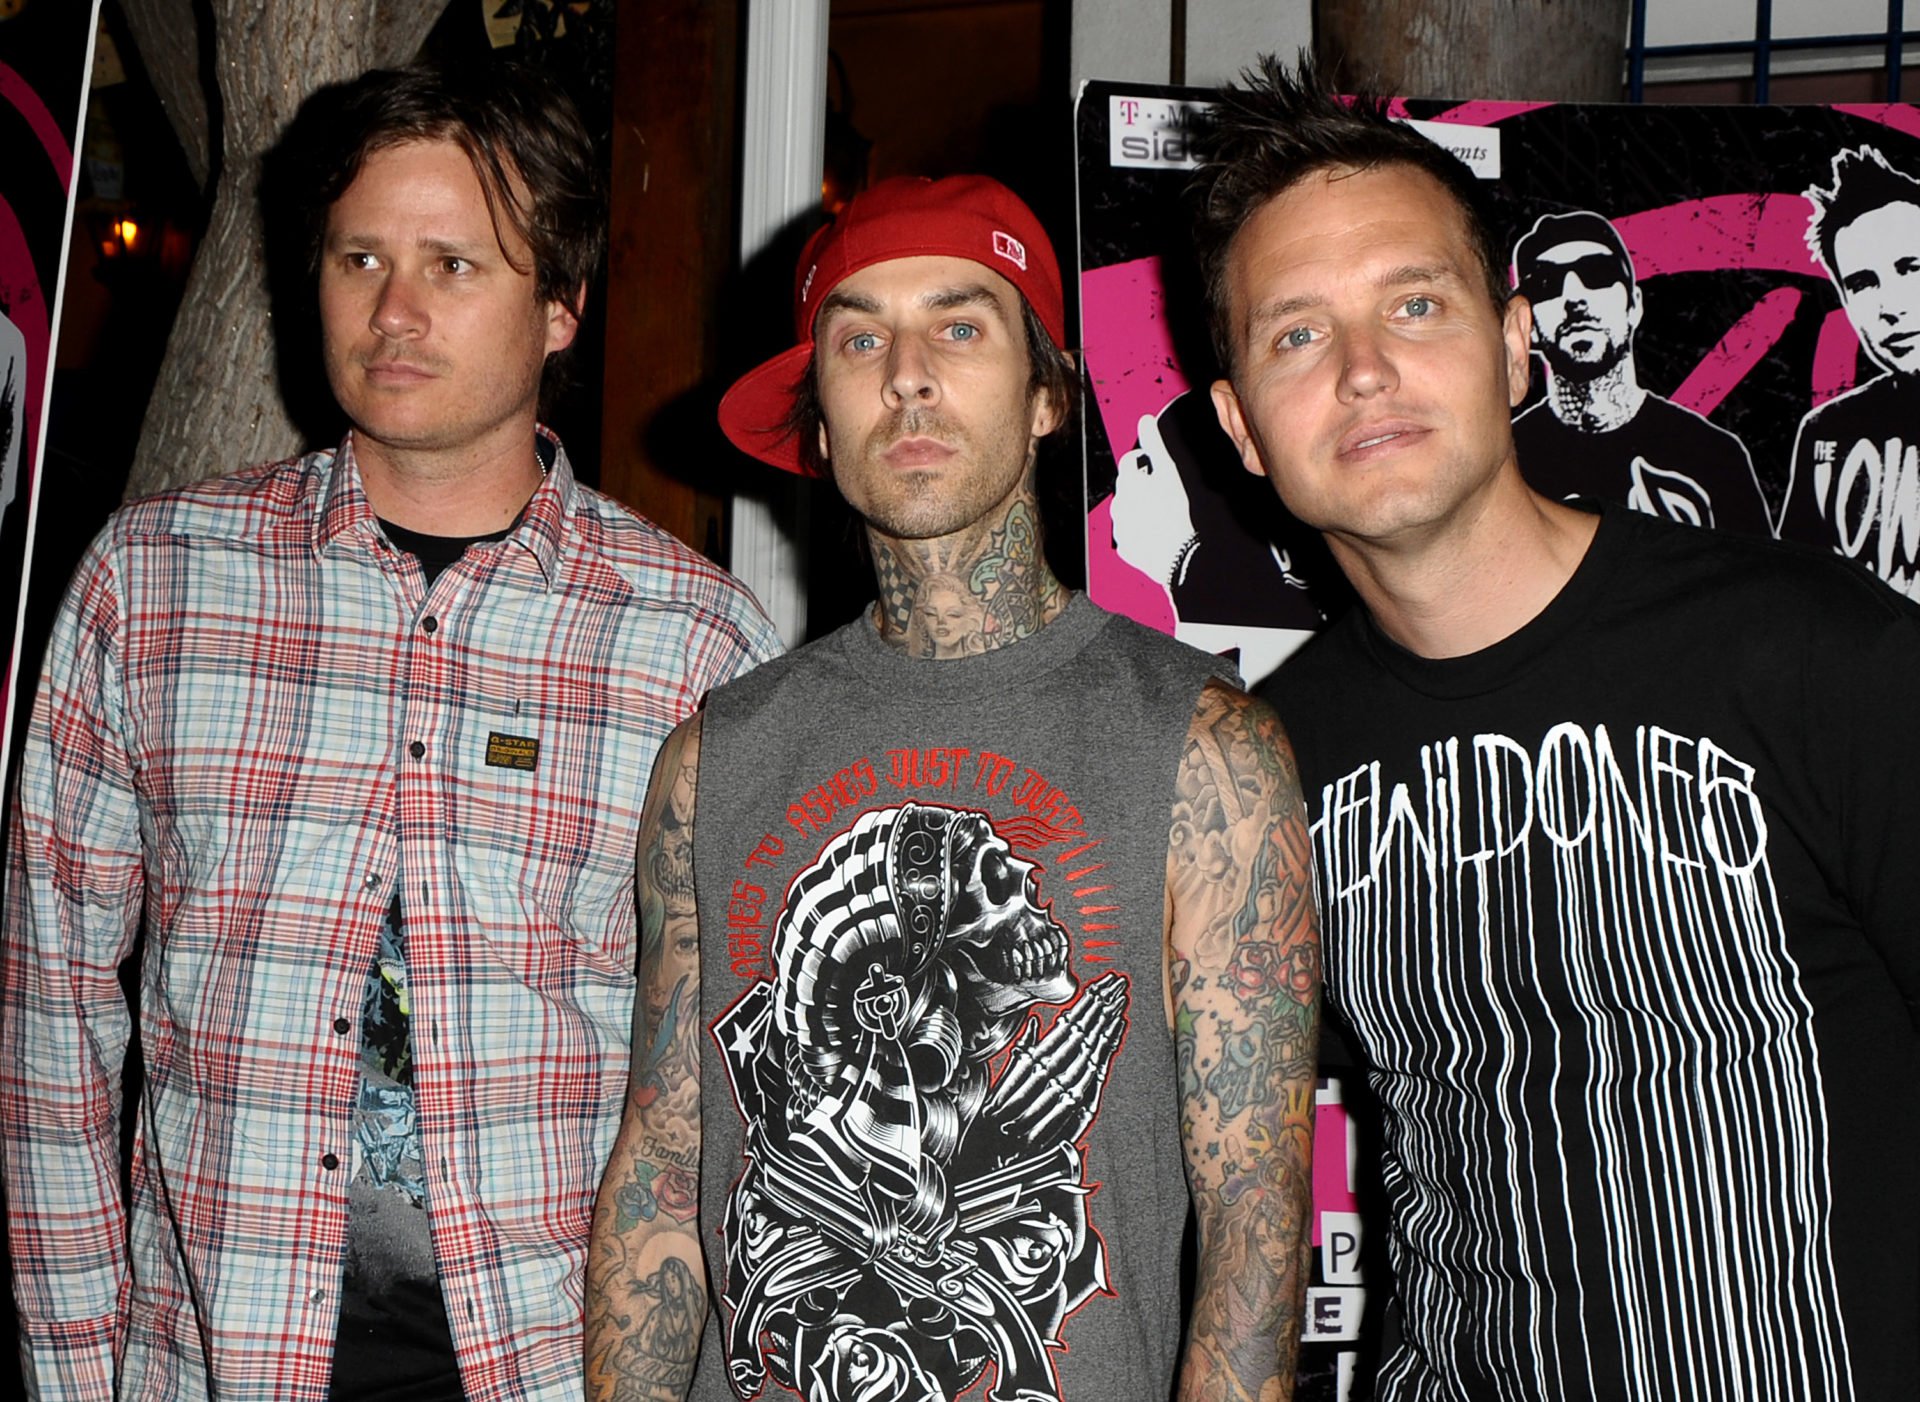 Blink-182’s story – Tragic plane crash, tension and cancer diagnosis